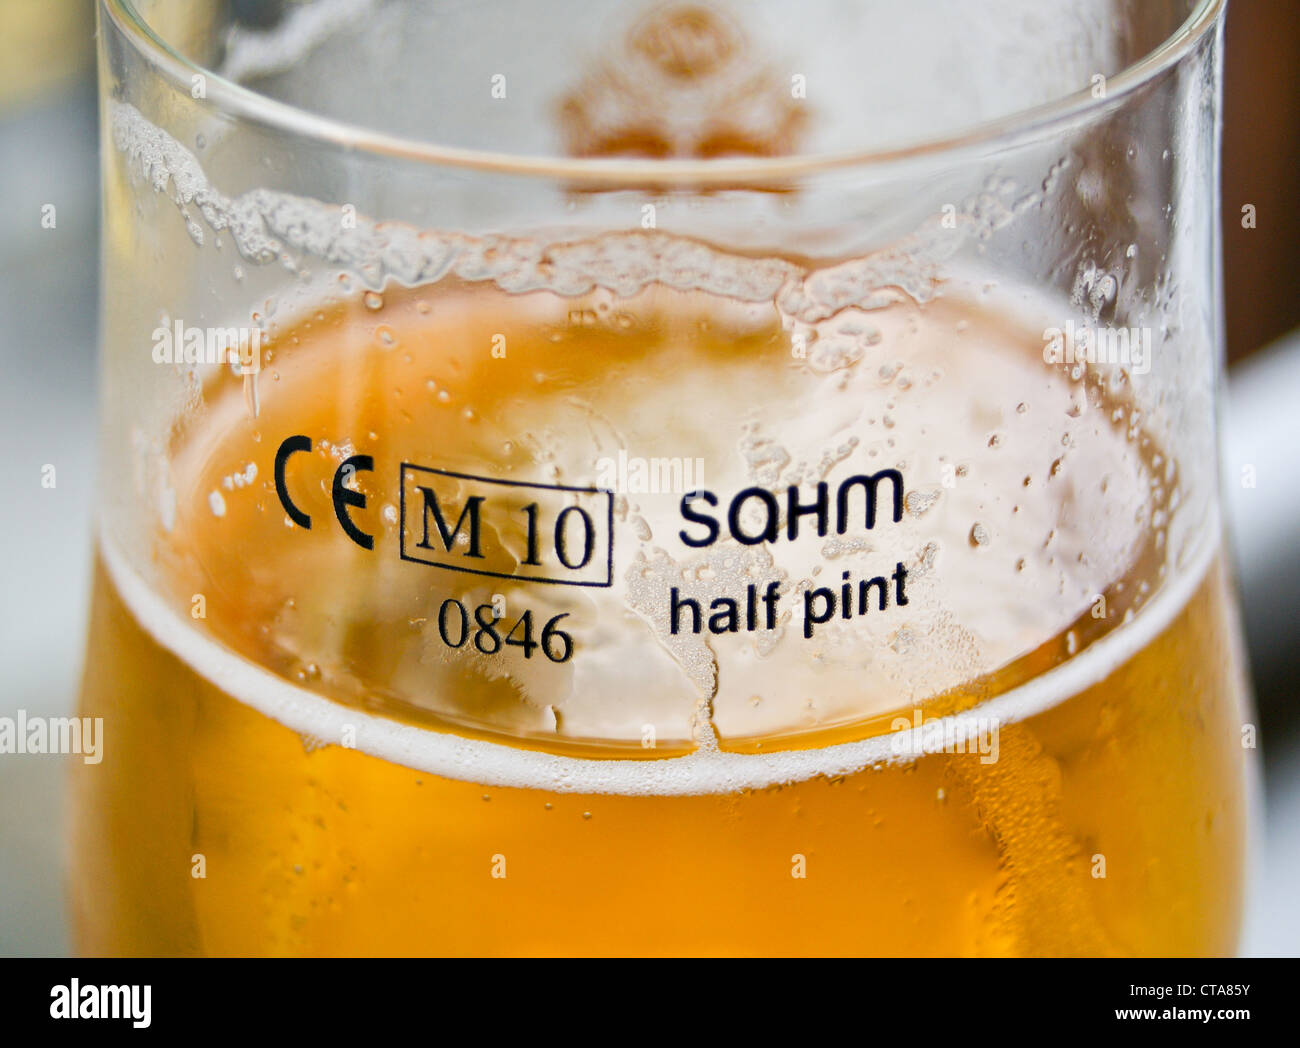 https://c8.alamy.com/comp/CTA85Y/a-half-pint-printed-glass-of-alhambra-especial-spanish-pale-lager-CTA85Y.jpg